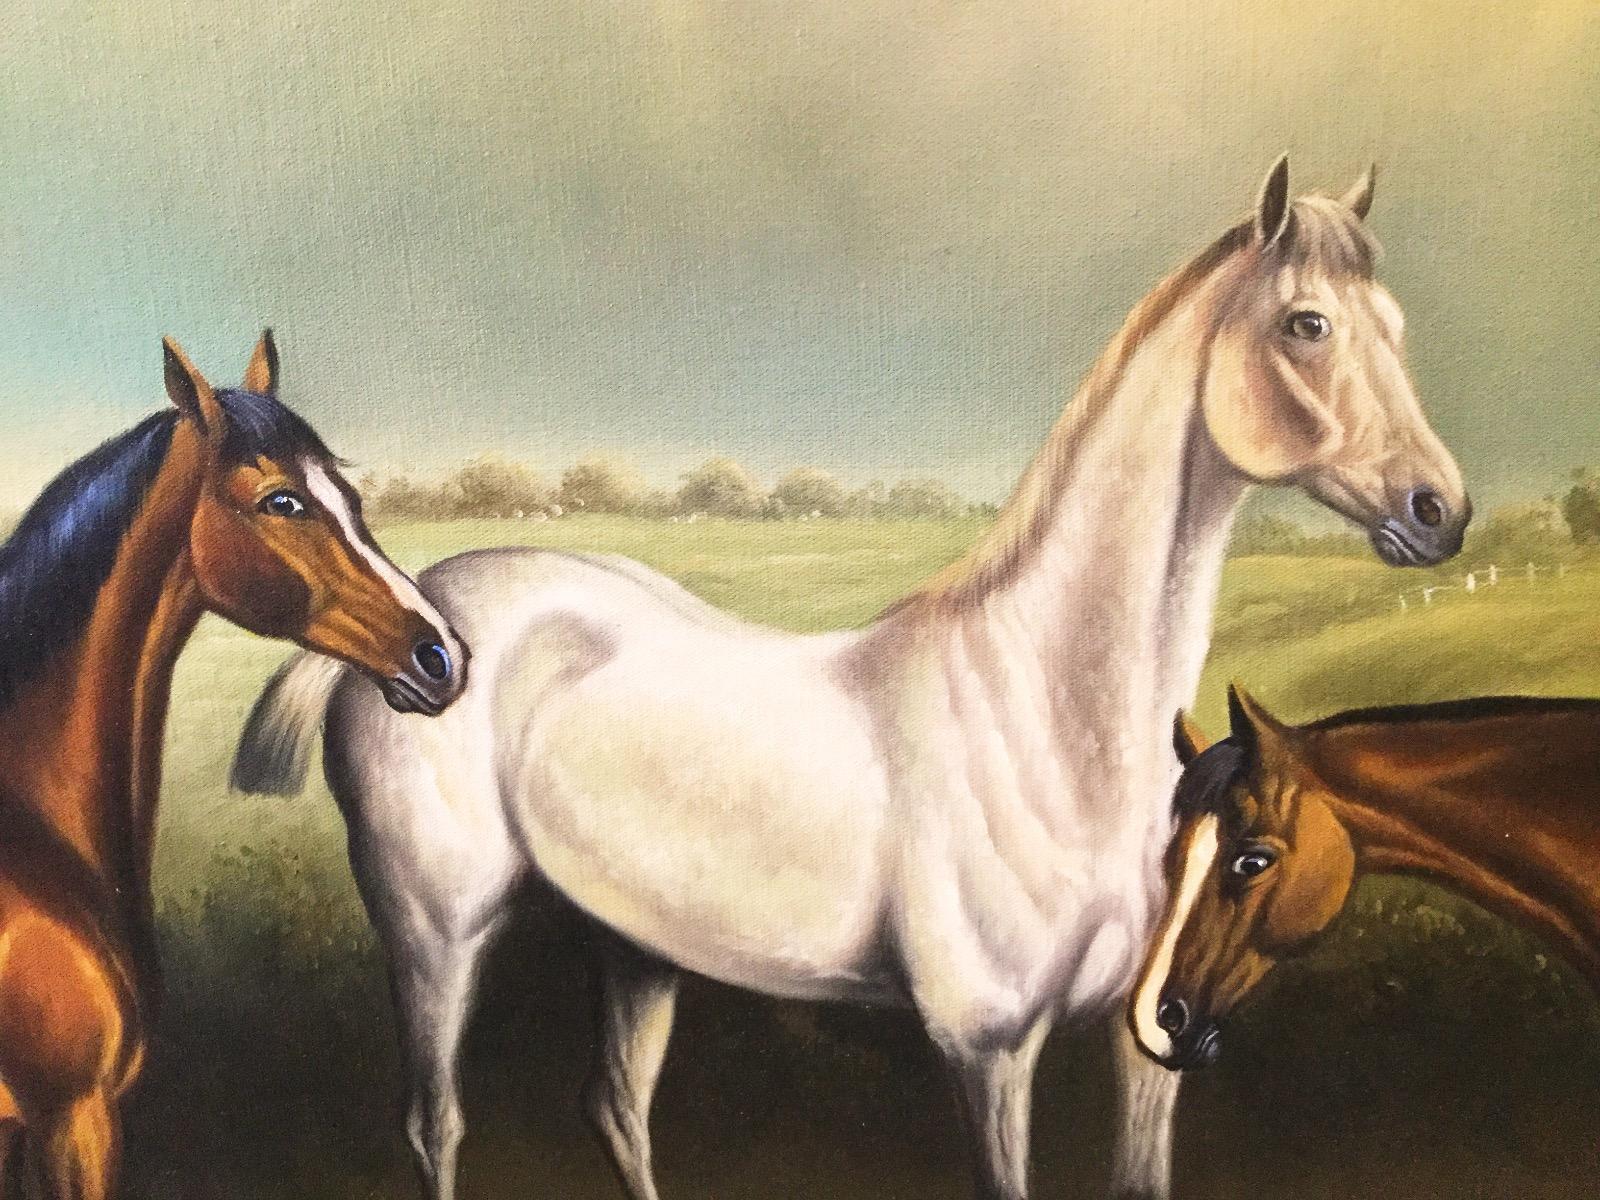 I am delighted to offer this huge acrylic oil painting on canvas of wild horses in a rural landscape beautifully executed in the style of similar works by the famous equine artist George Stubbs (1724-1806).

George Stubbs was born to a wealthy